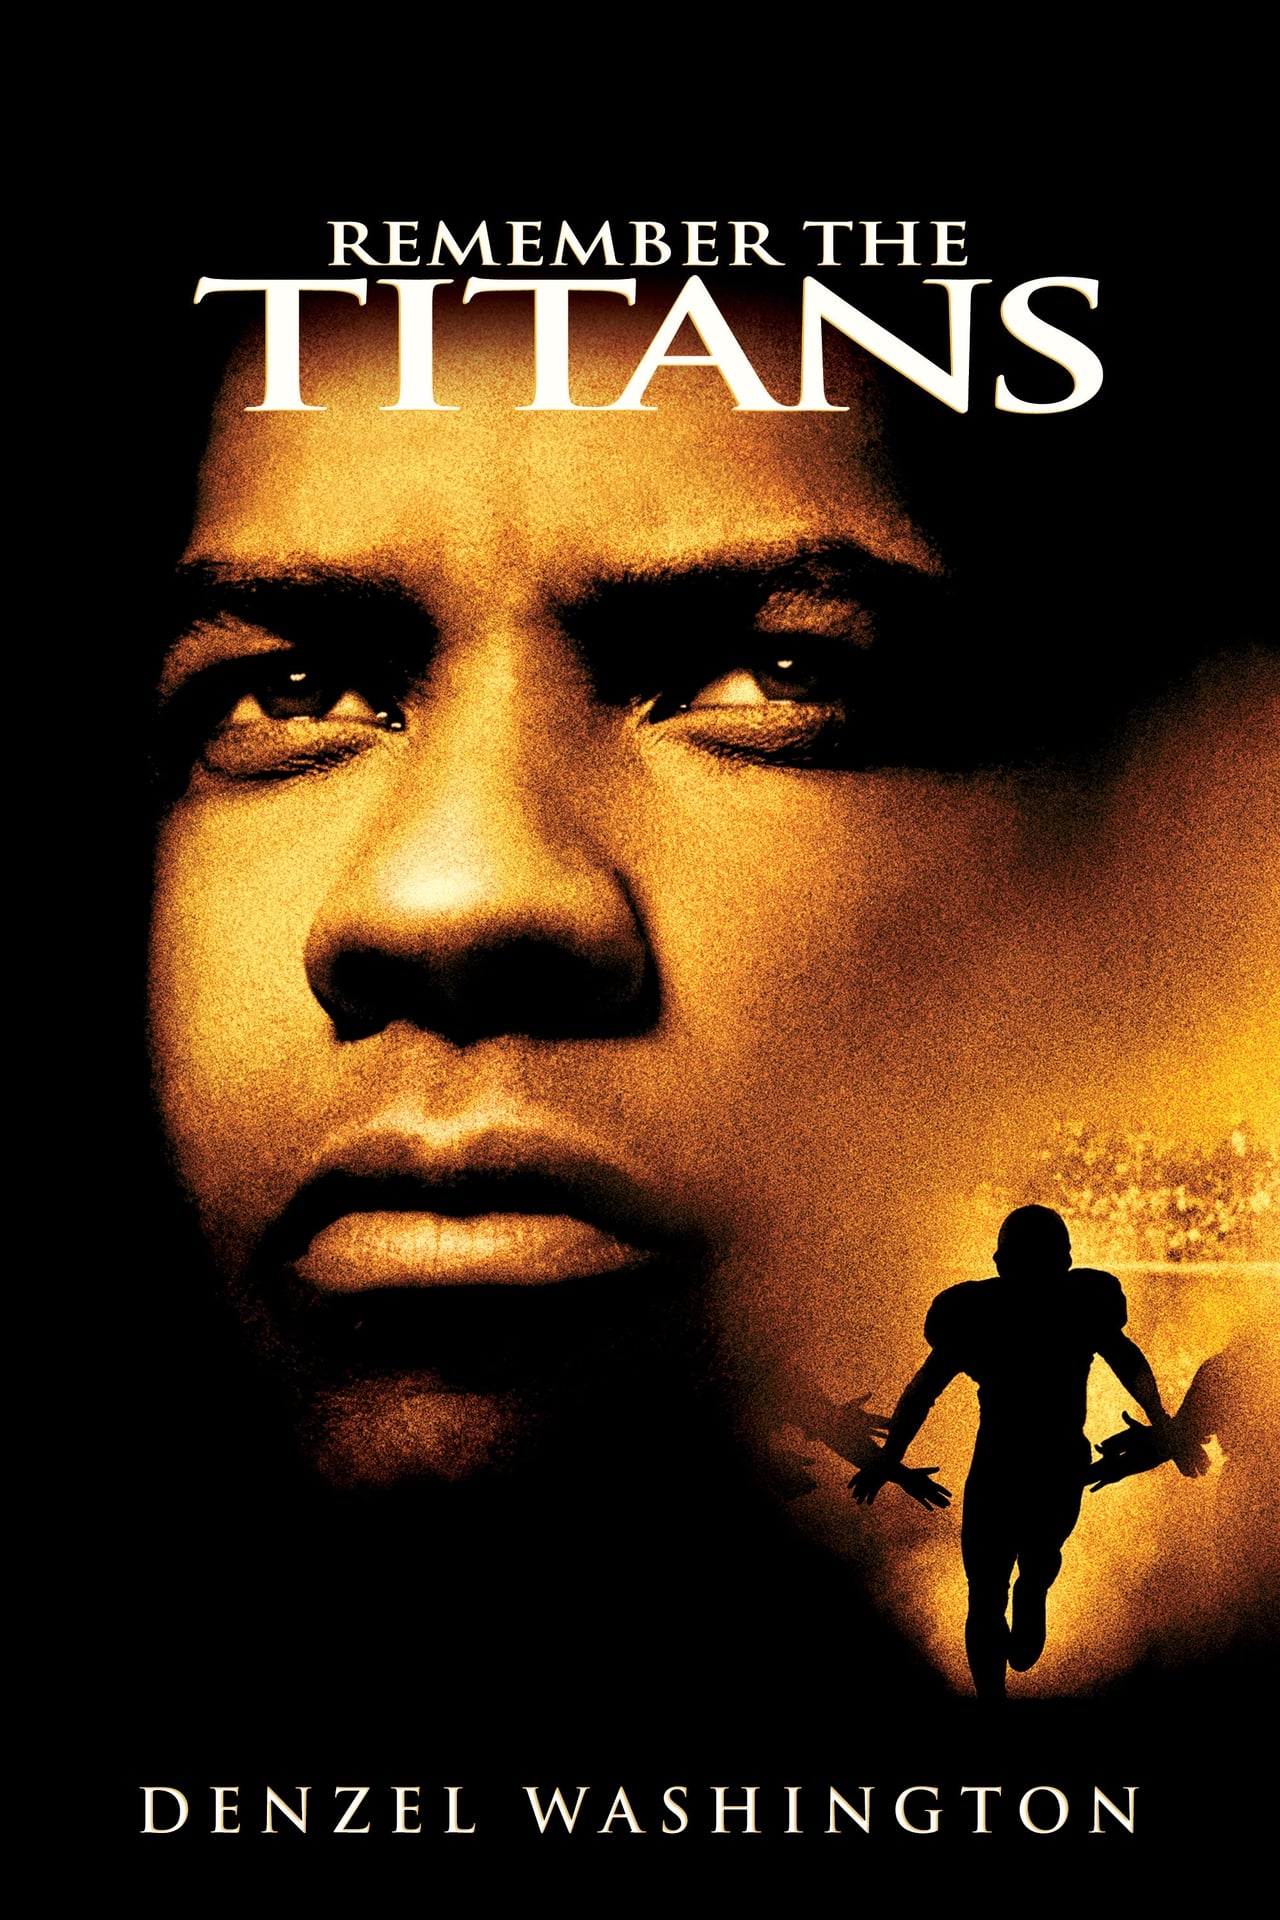 Plot Summary of Remember the Titans